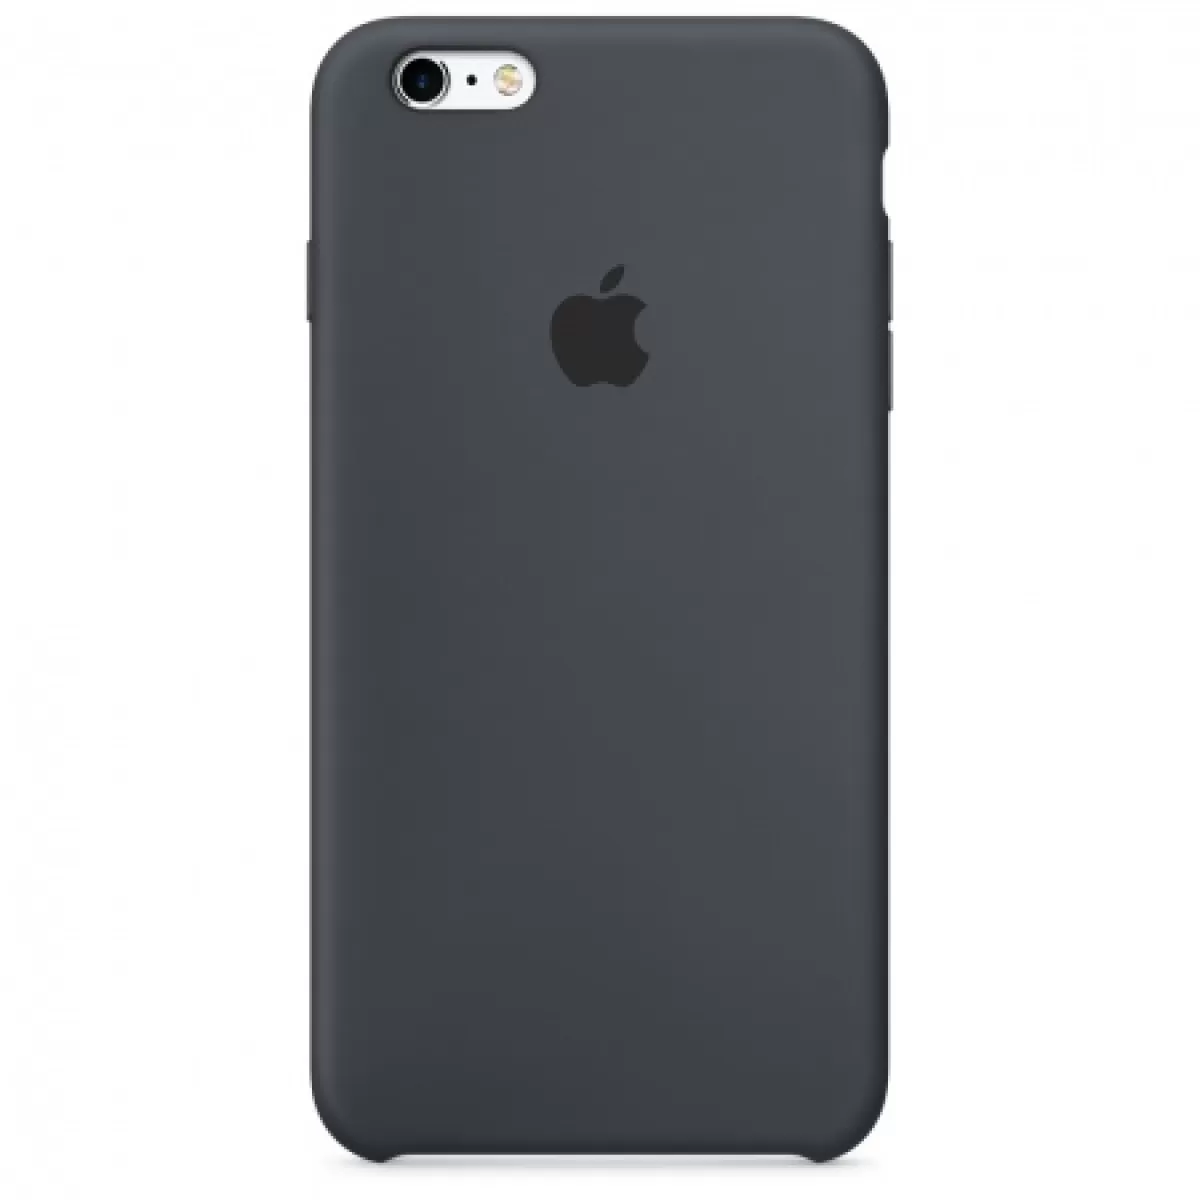 Apple iPhone 6s Plus Silicone Case Charcoal Gray